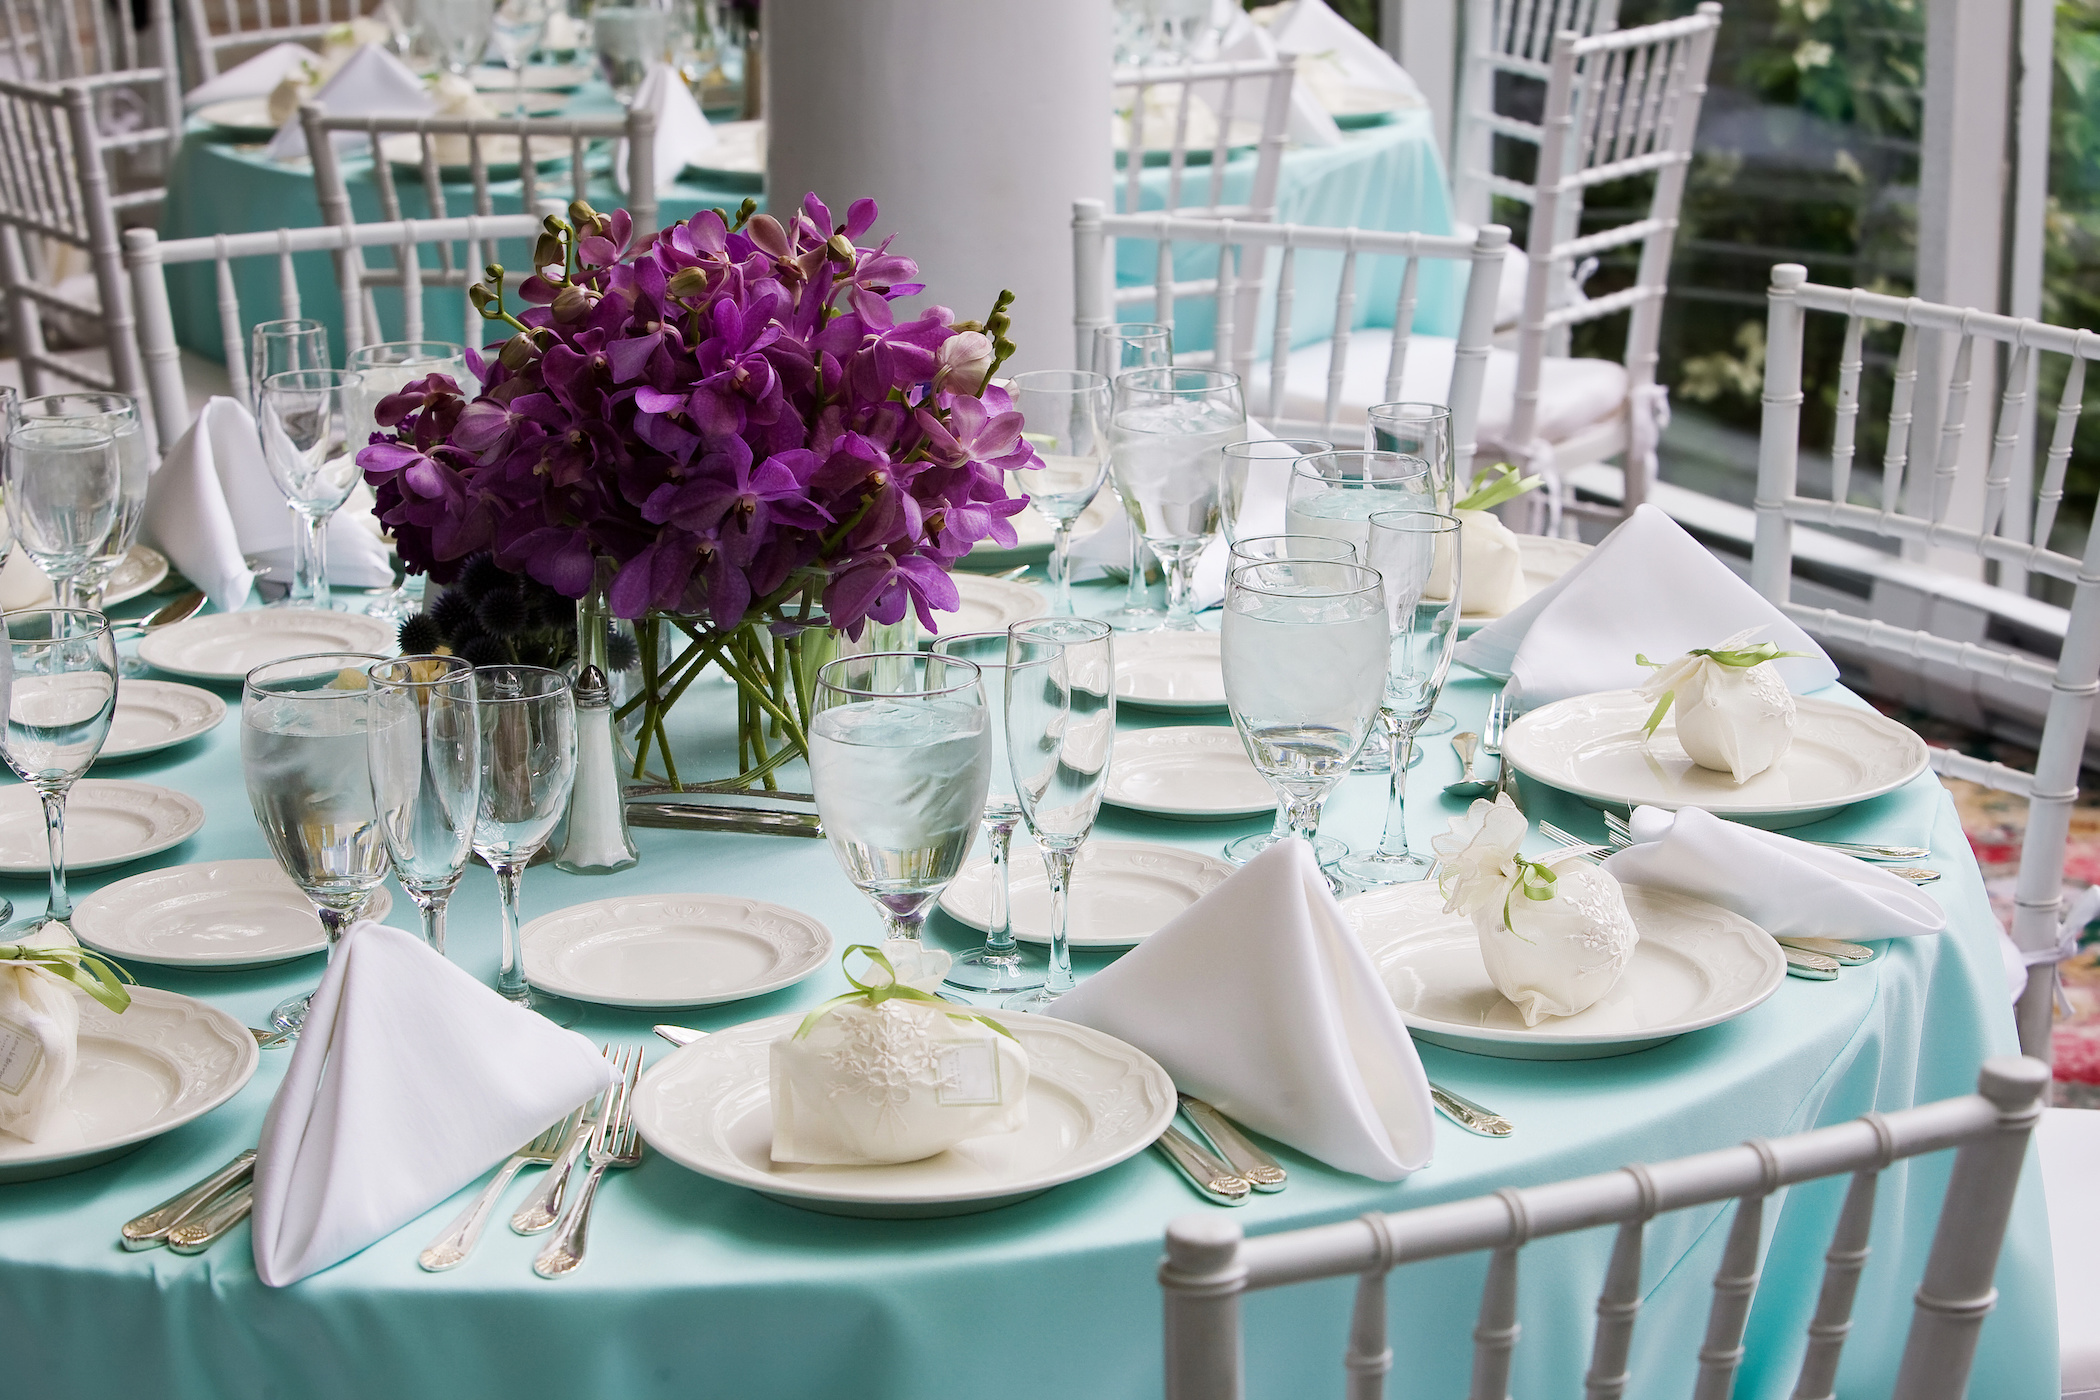 Beautifully set table for wedding or event